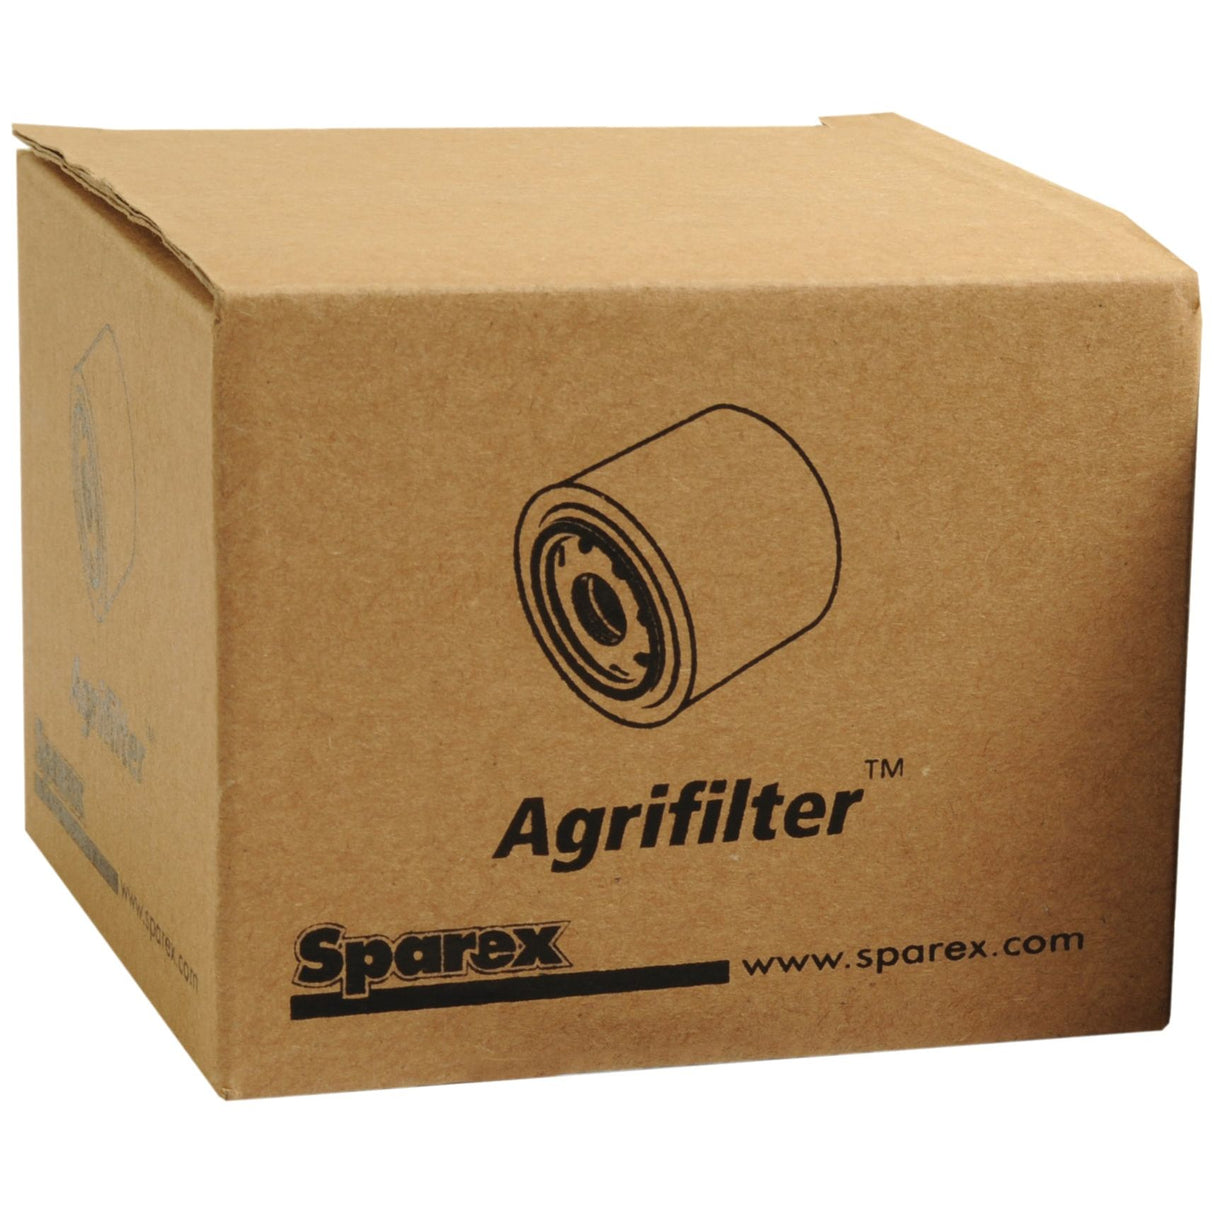 Oil Filter - Spin On -
 - S.76400 - Farming Parts